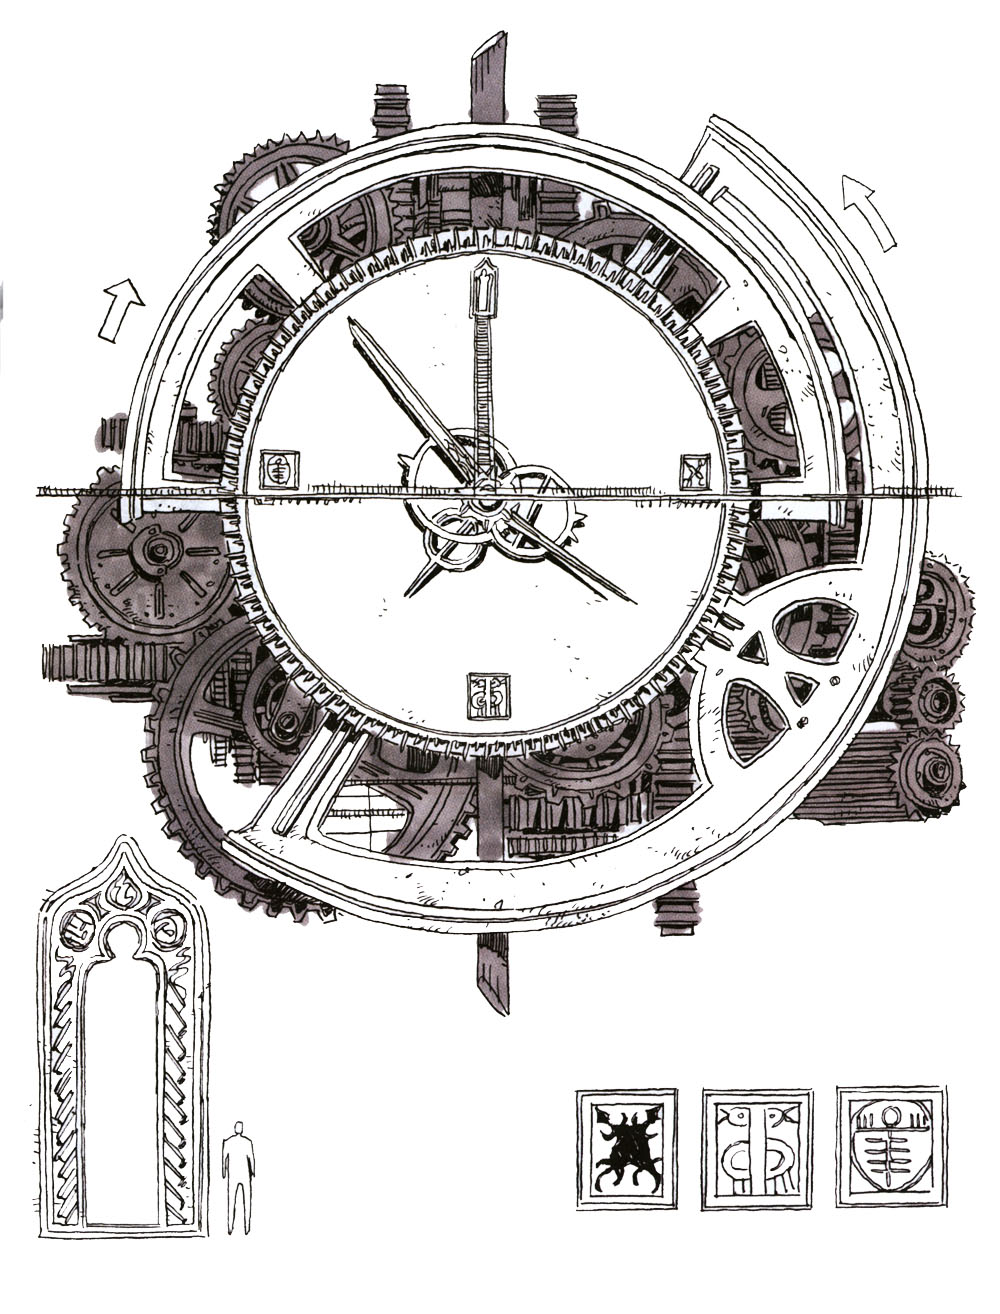 Read online Clockmaker comic -  Issue #1 - 20